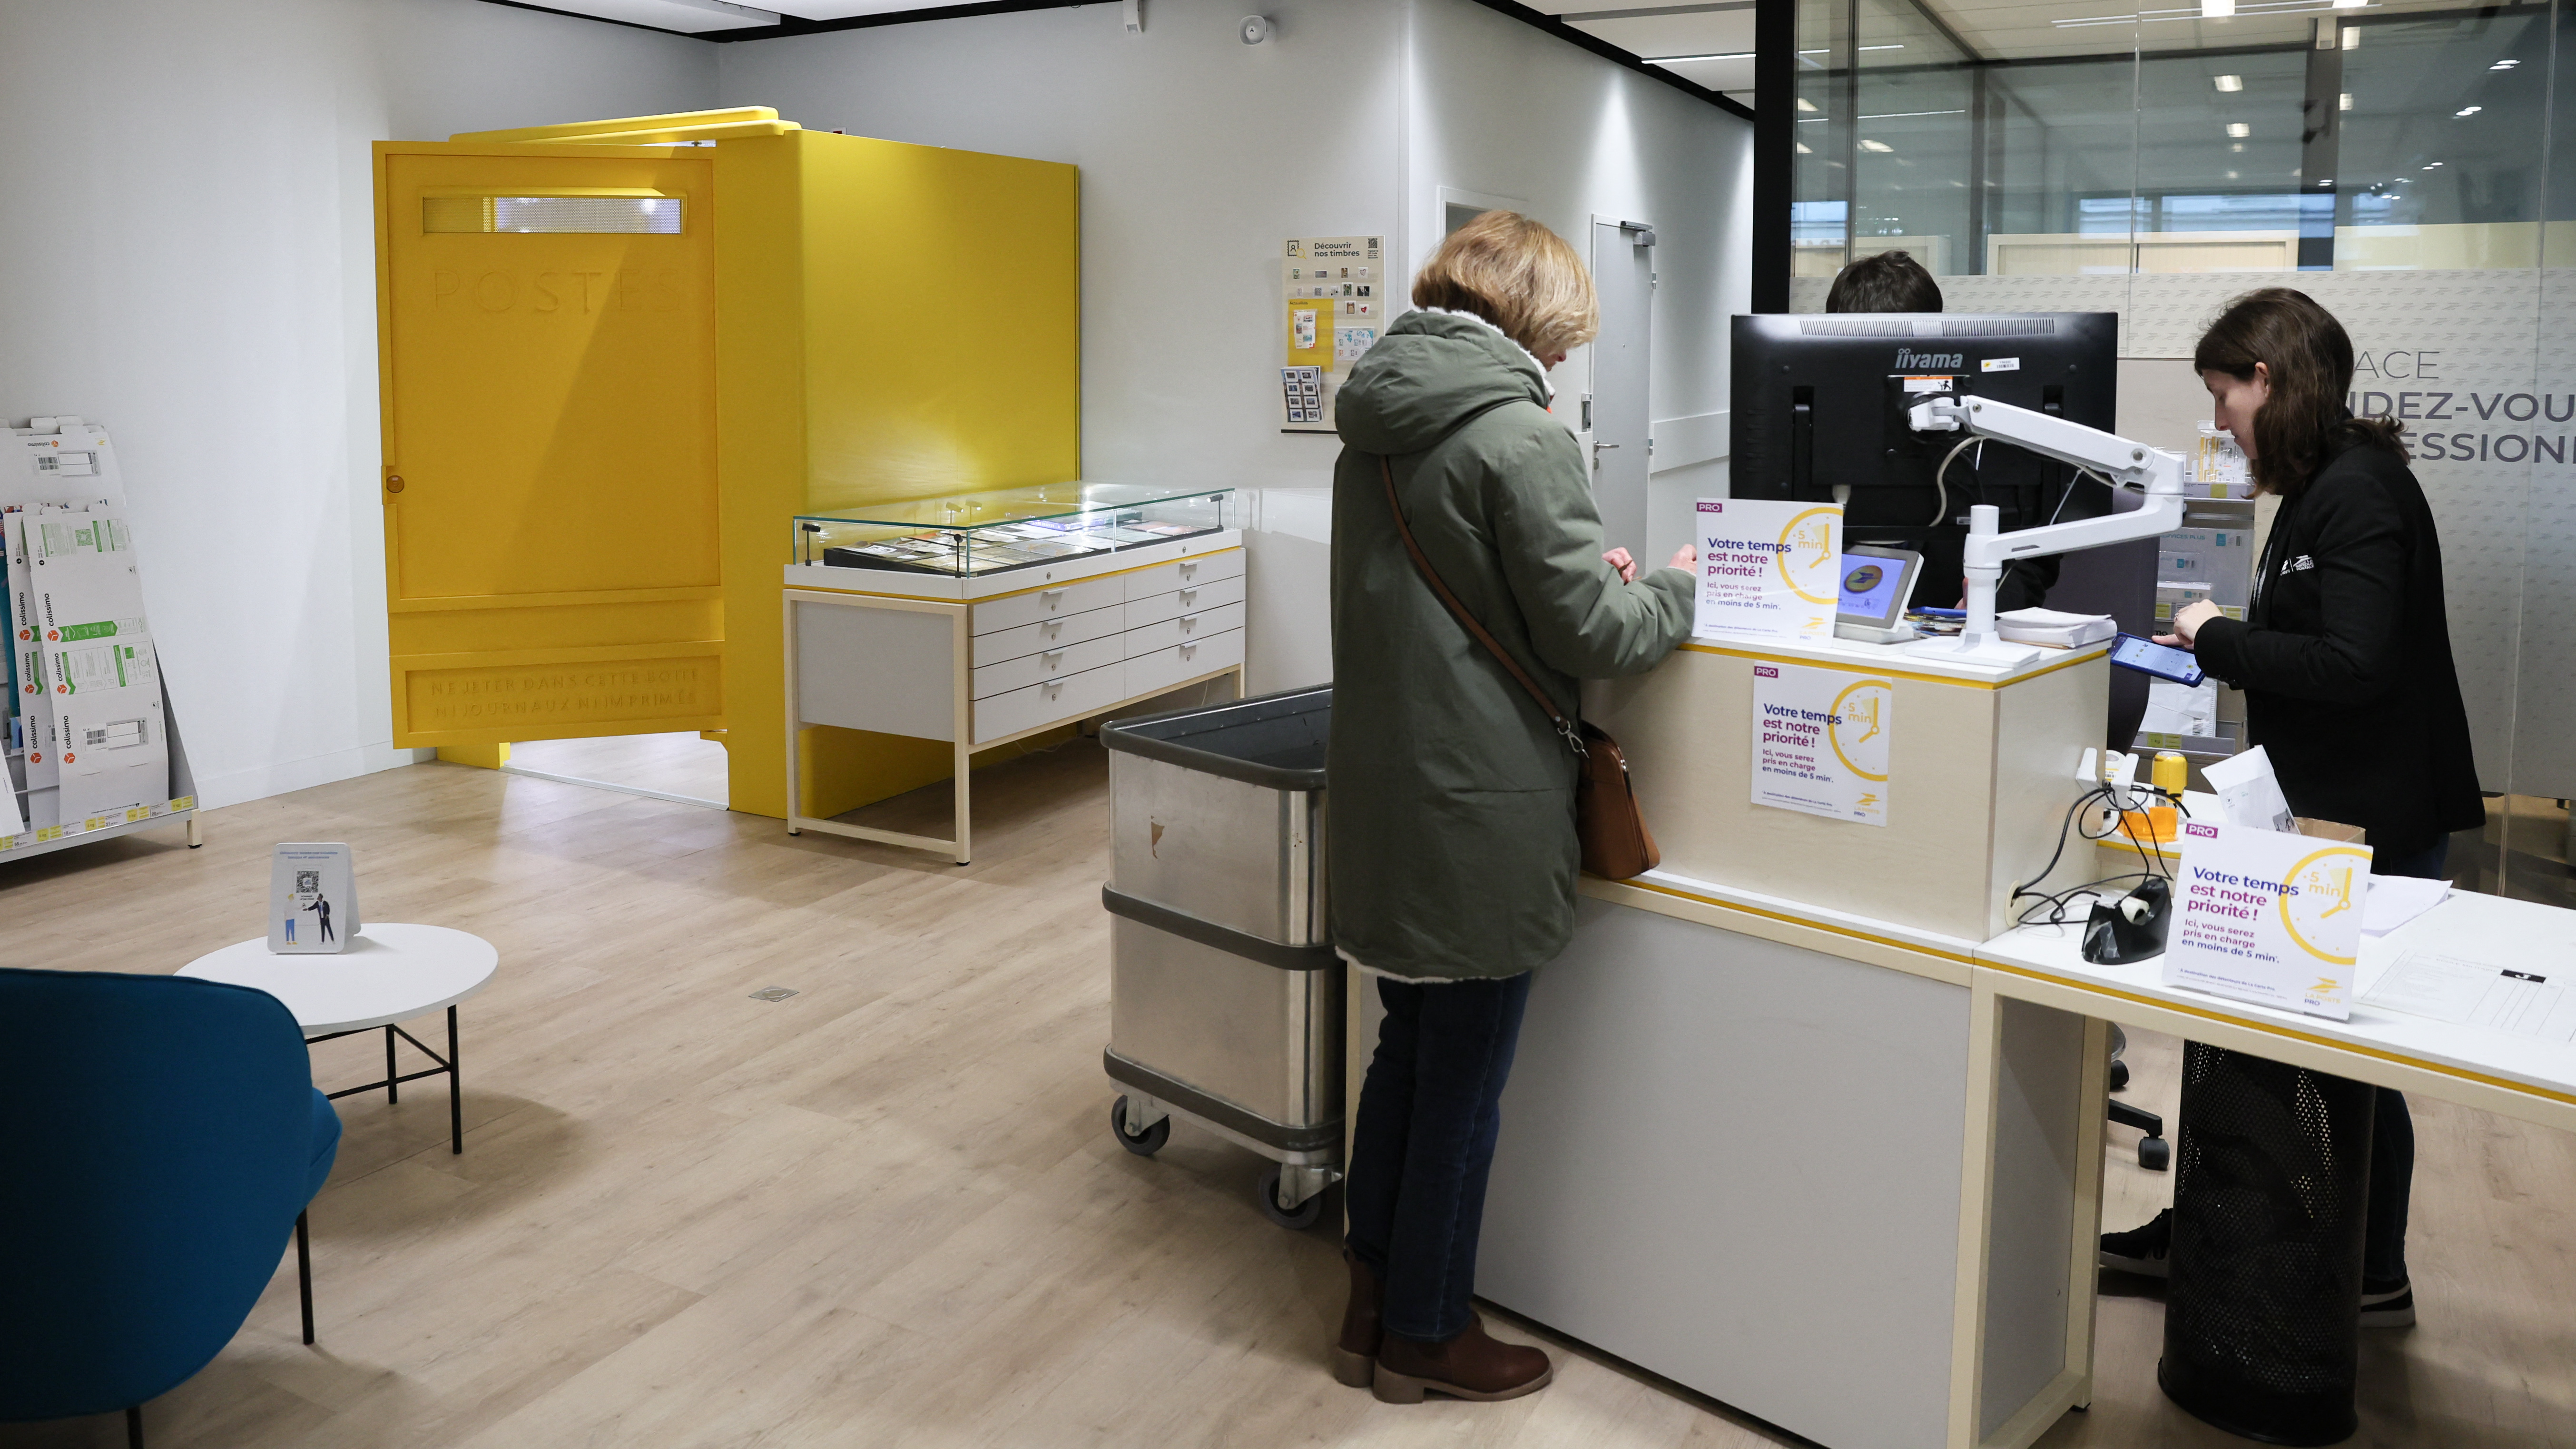 A client stands near a retry booth set up in a La Poste French post office in Paris. /Alain Jocard/AFP